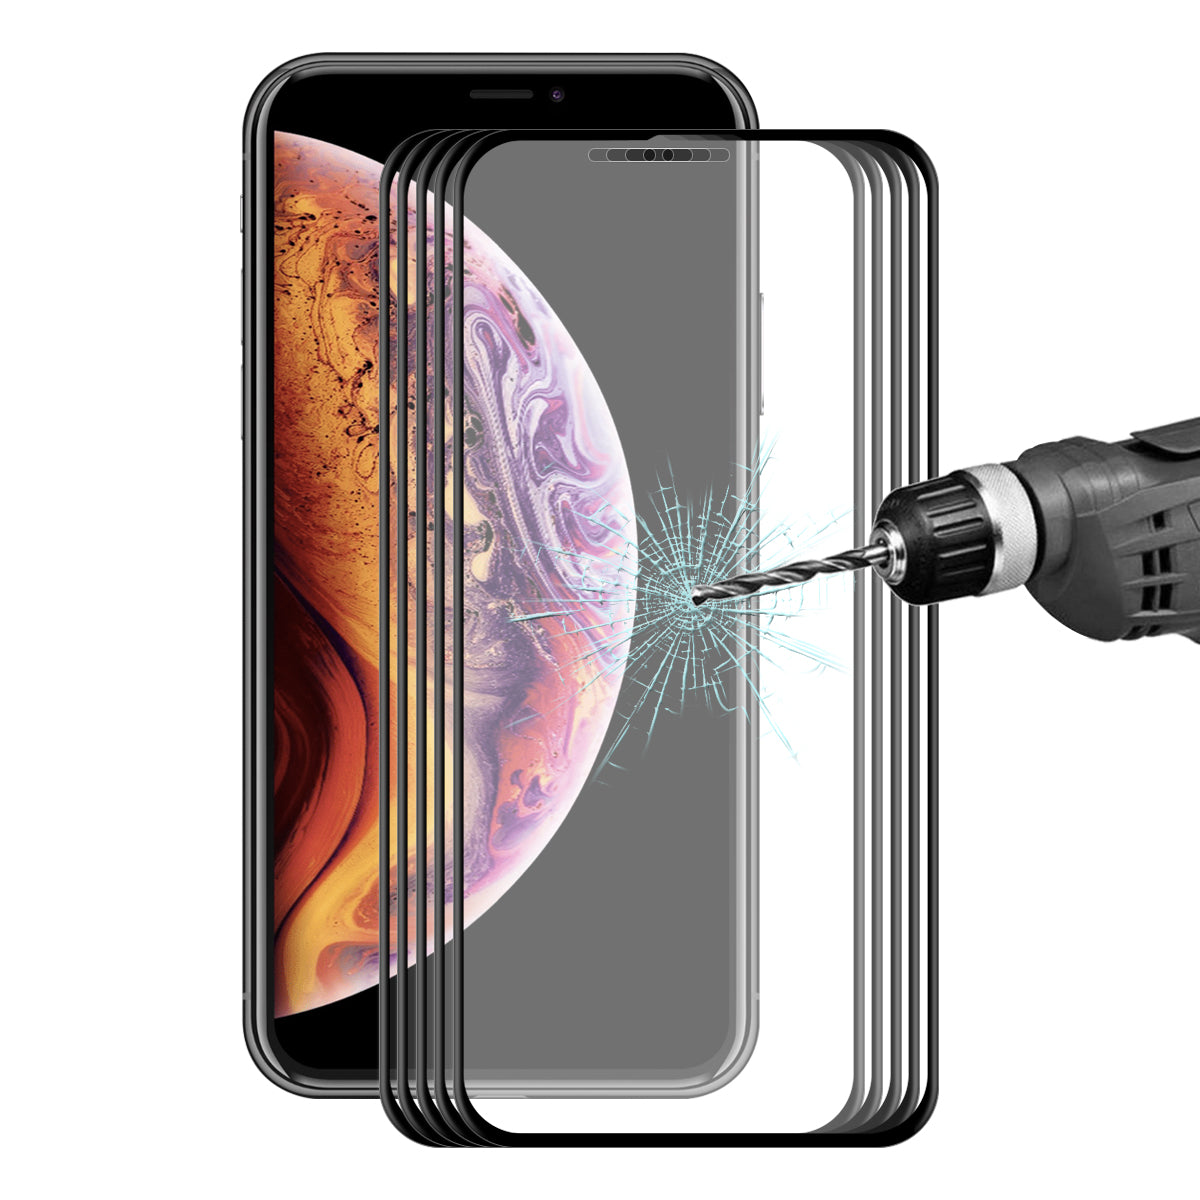 5 Packs Bakeey Screen Protector For iPhone XS Max 3D Soft Edge Carbon Fiber Tempered Glass Film